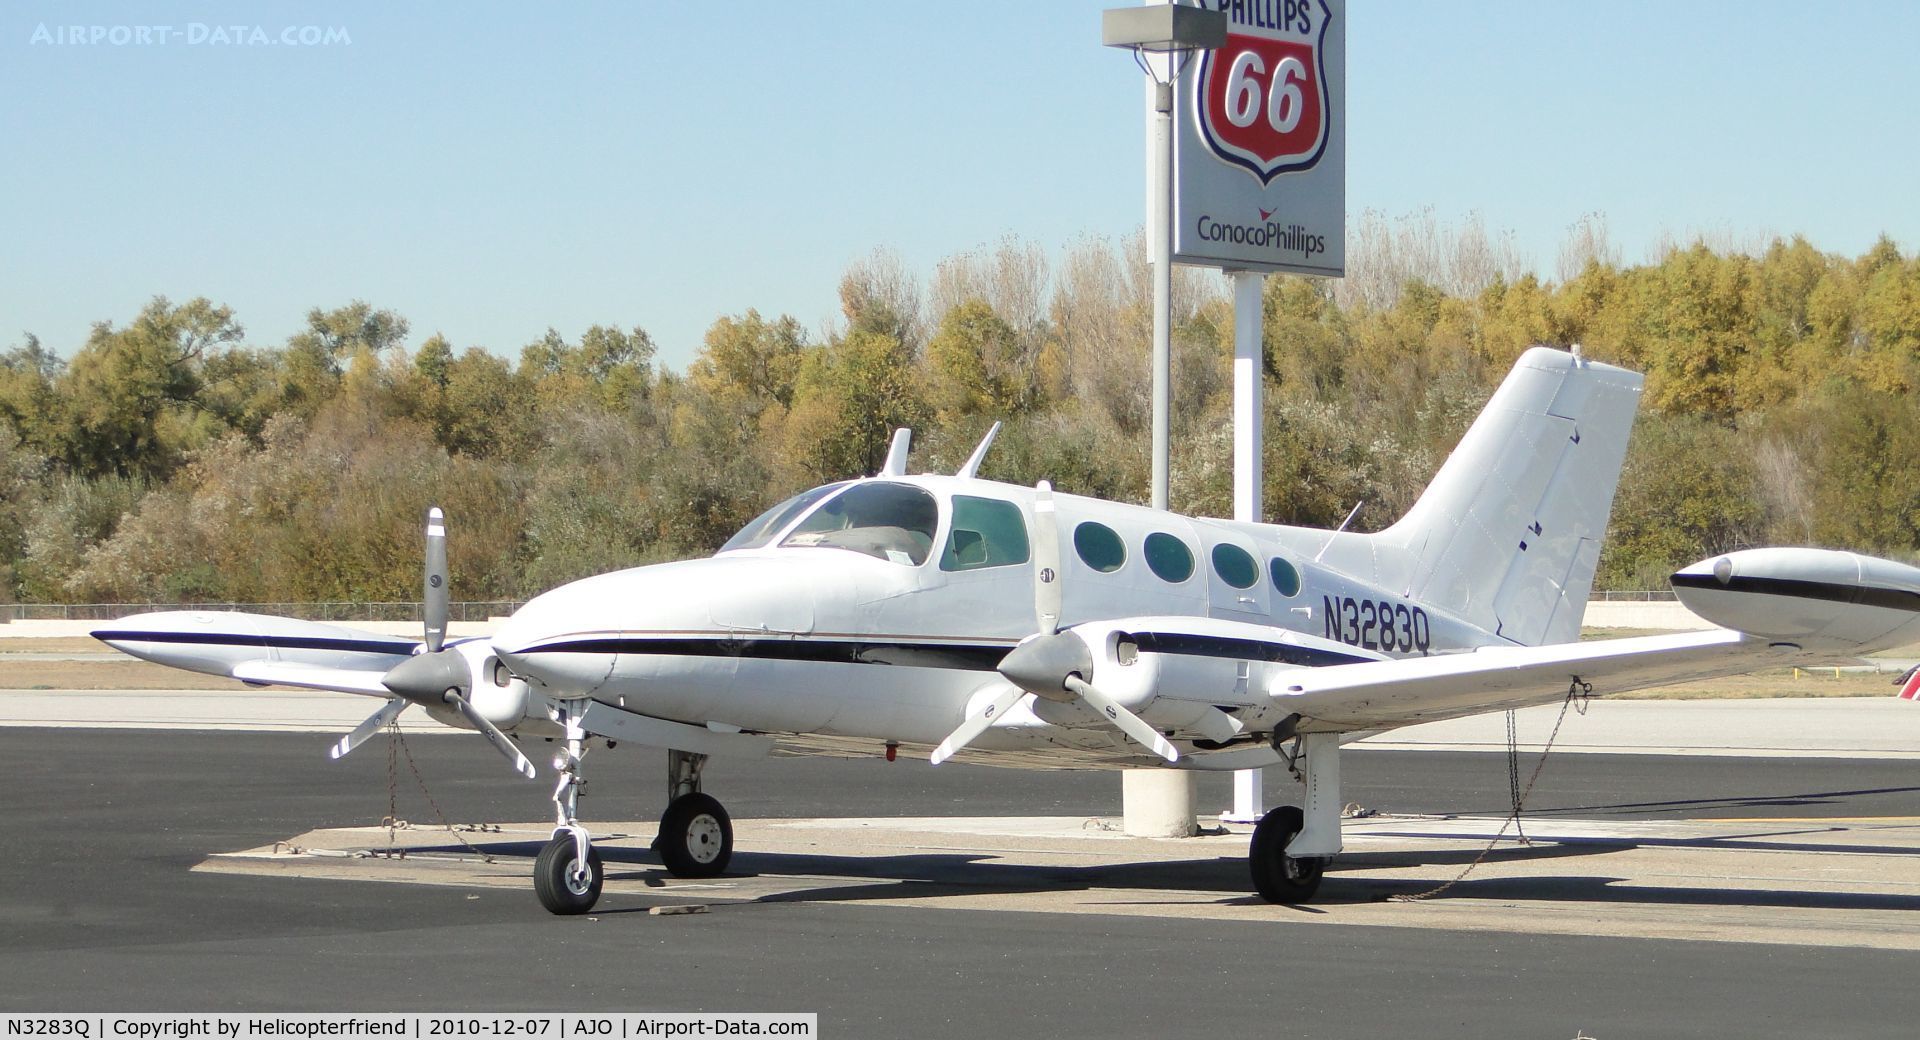 N3283Q, 1967 Cessna 402 C/N 402-0083, Parked next to Phillip 66 sign